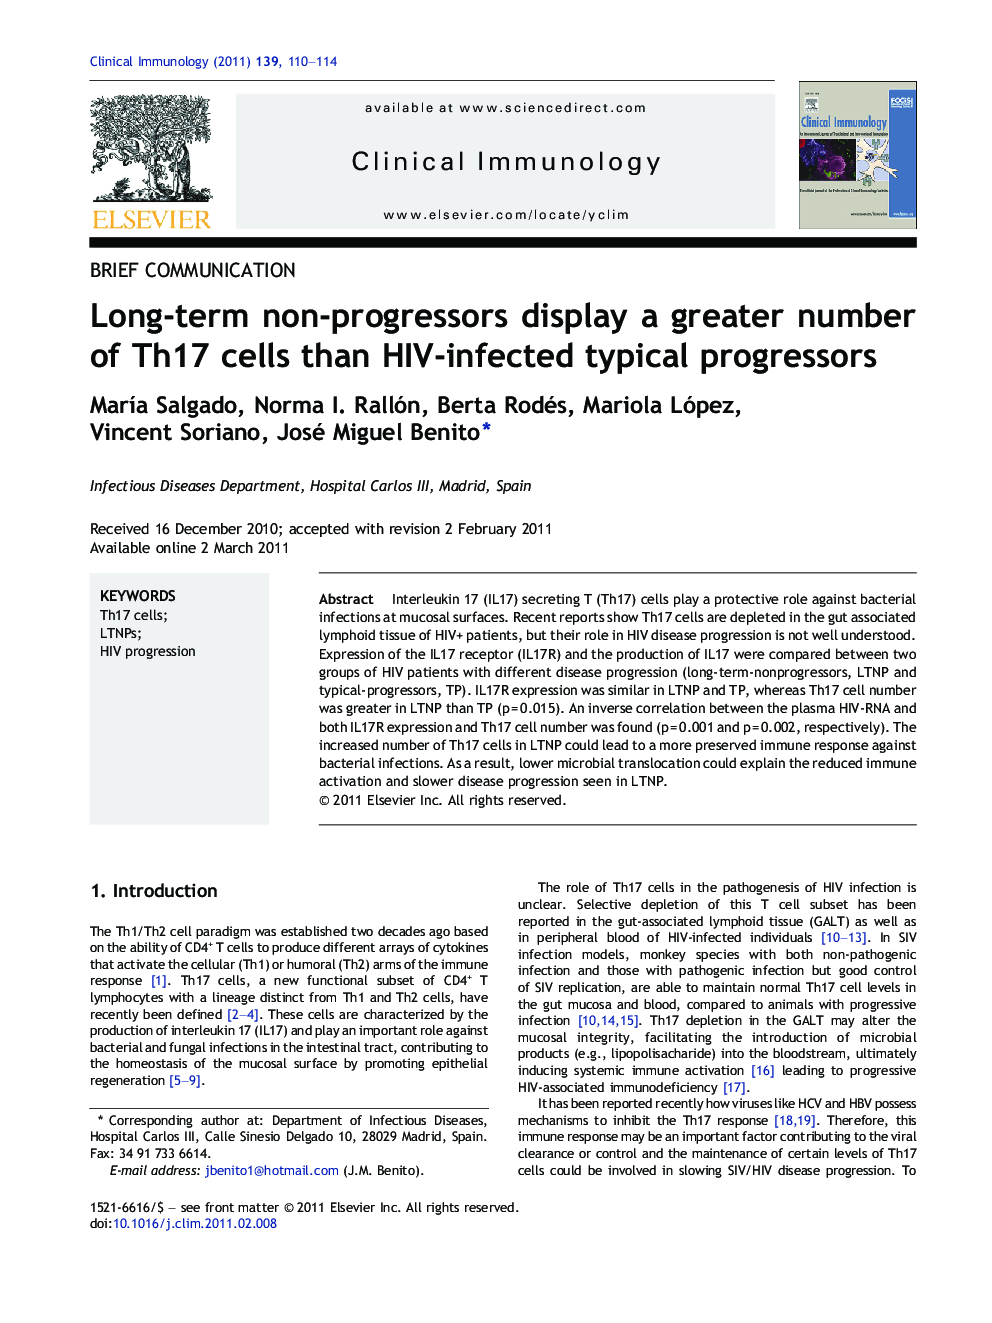 Long-term non-progressors display a greater number of Th17 cells than HIV-infected typical progressors